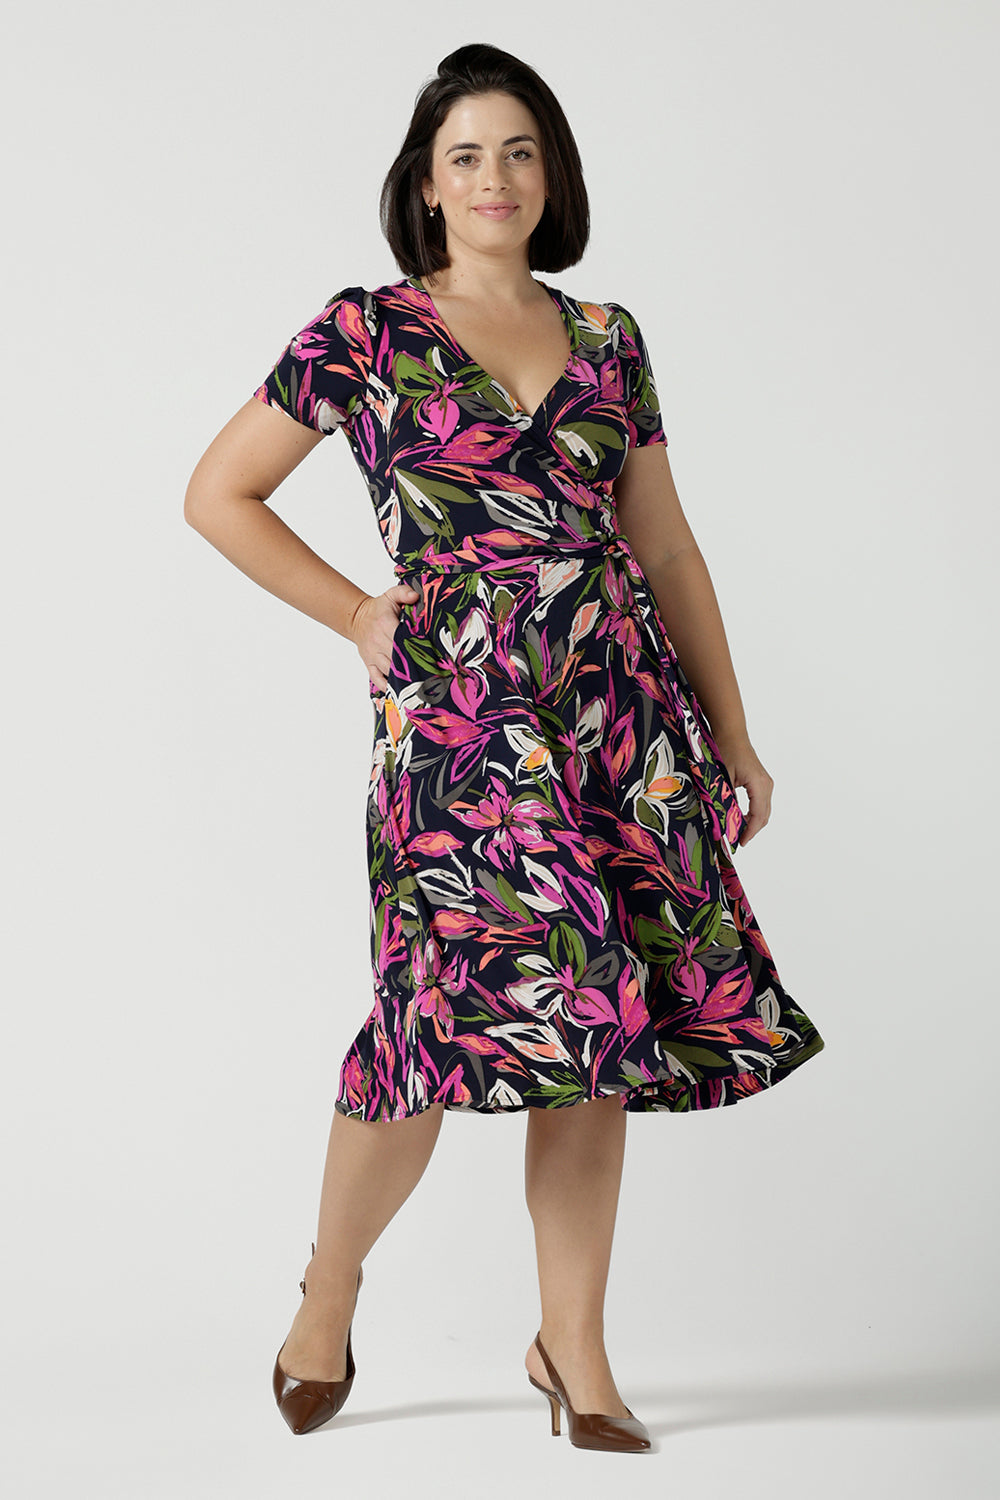 Size 10 woman wears a size 16 woman wears the Maree dress in Vivid Flora. Short sleeve functioning wrap dress. Knee length dress great for petite heights. Work corporate to weekend wear. Travel friendly. Made in Australia for women size 8 - 24.